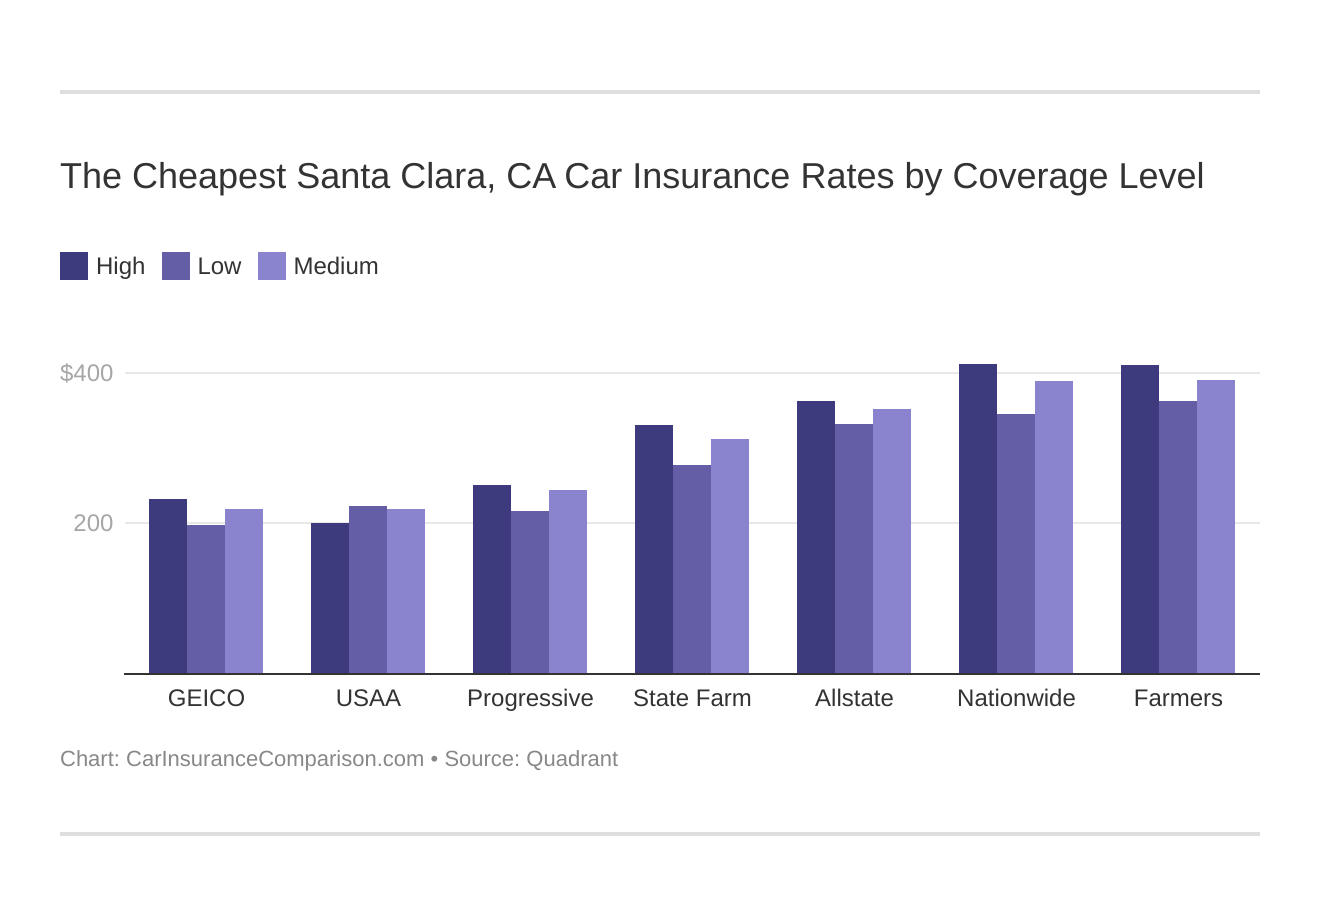 The Cheapest Santa Clara, CA Car Insurance Rates by Coverage Level